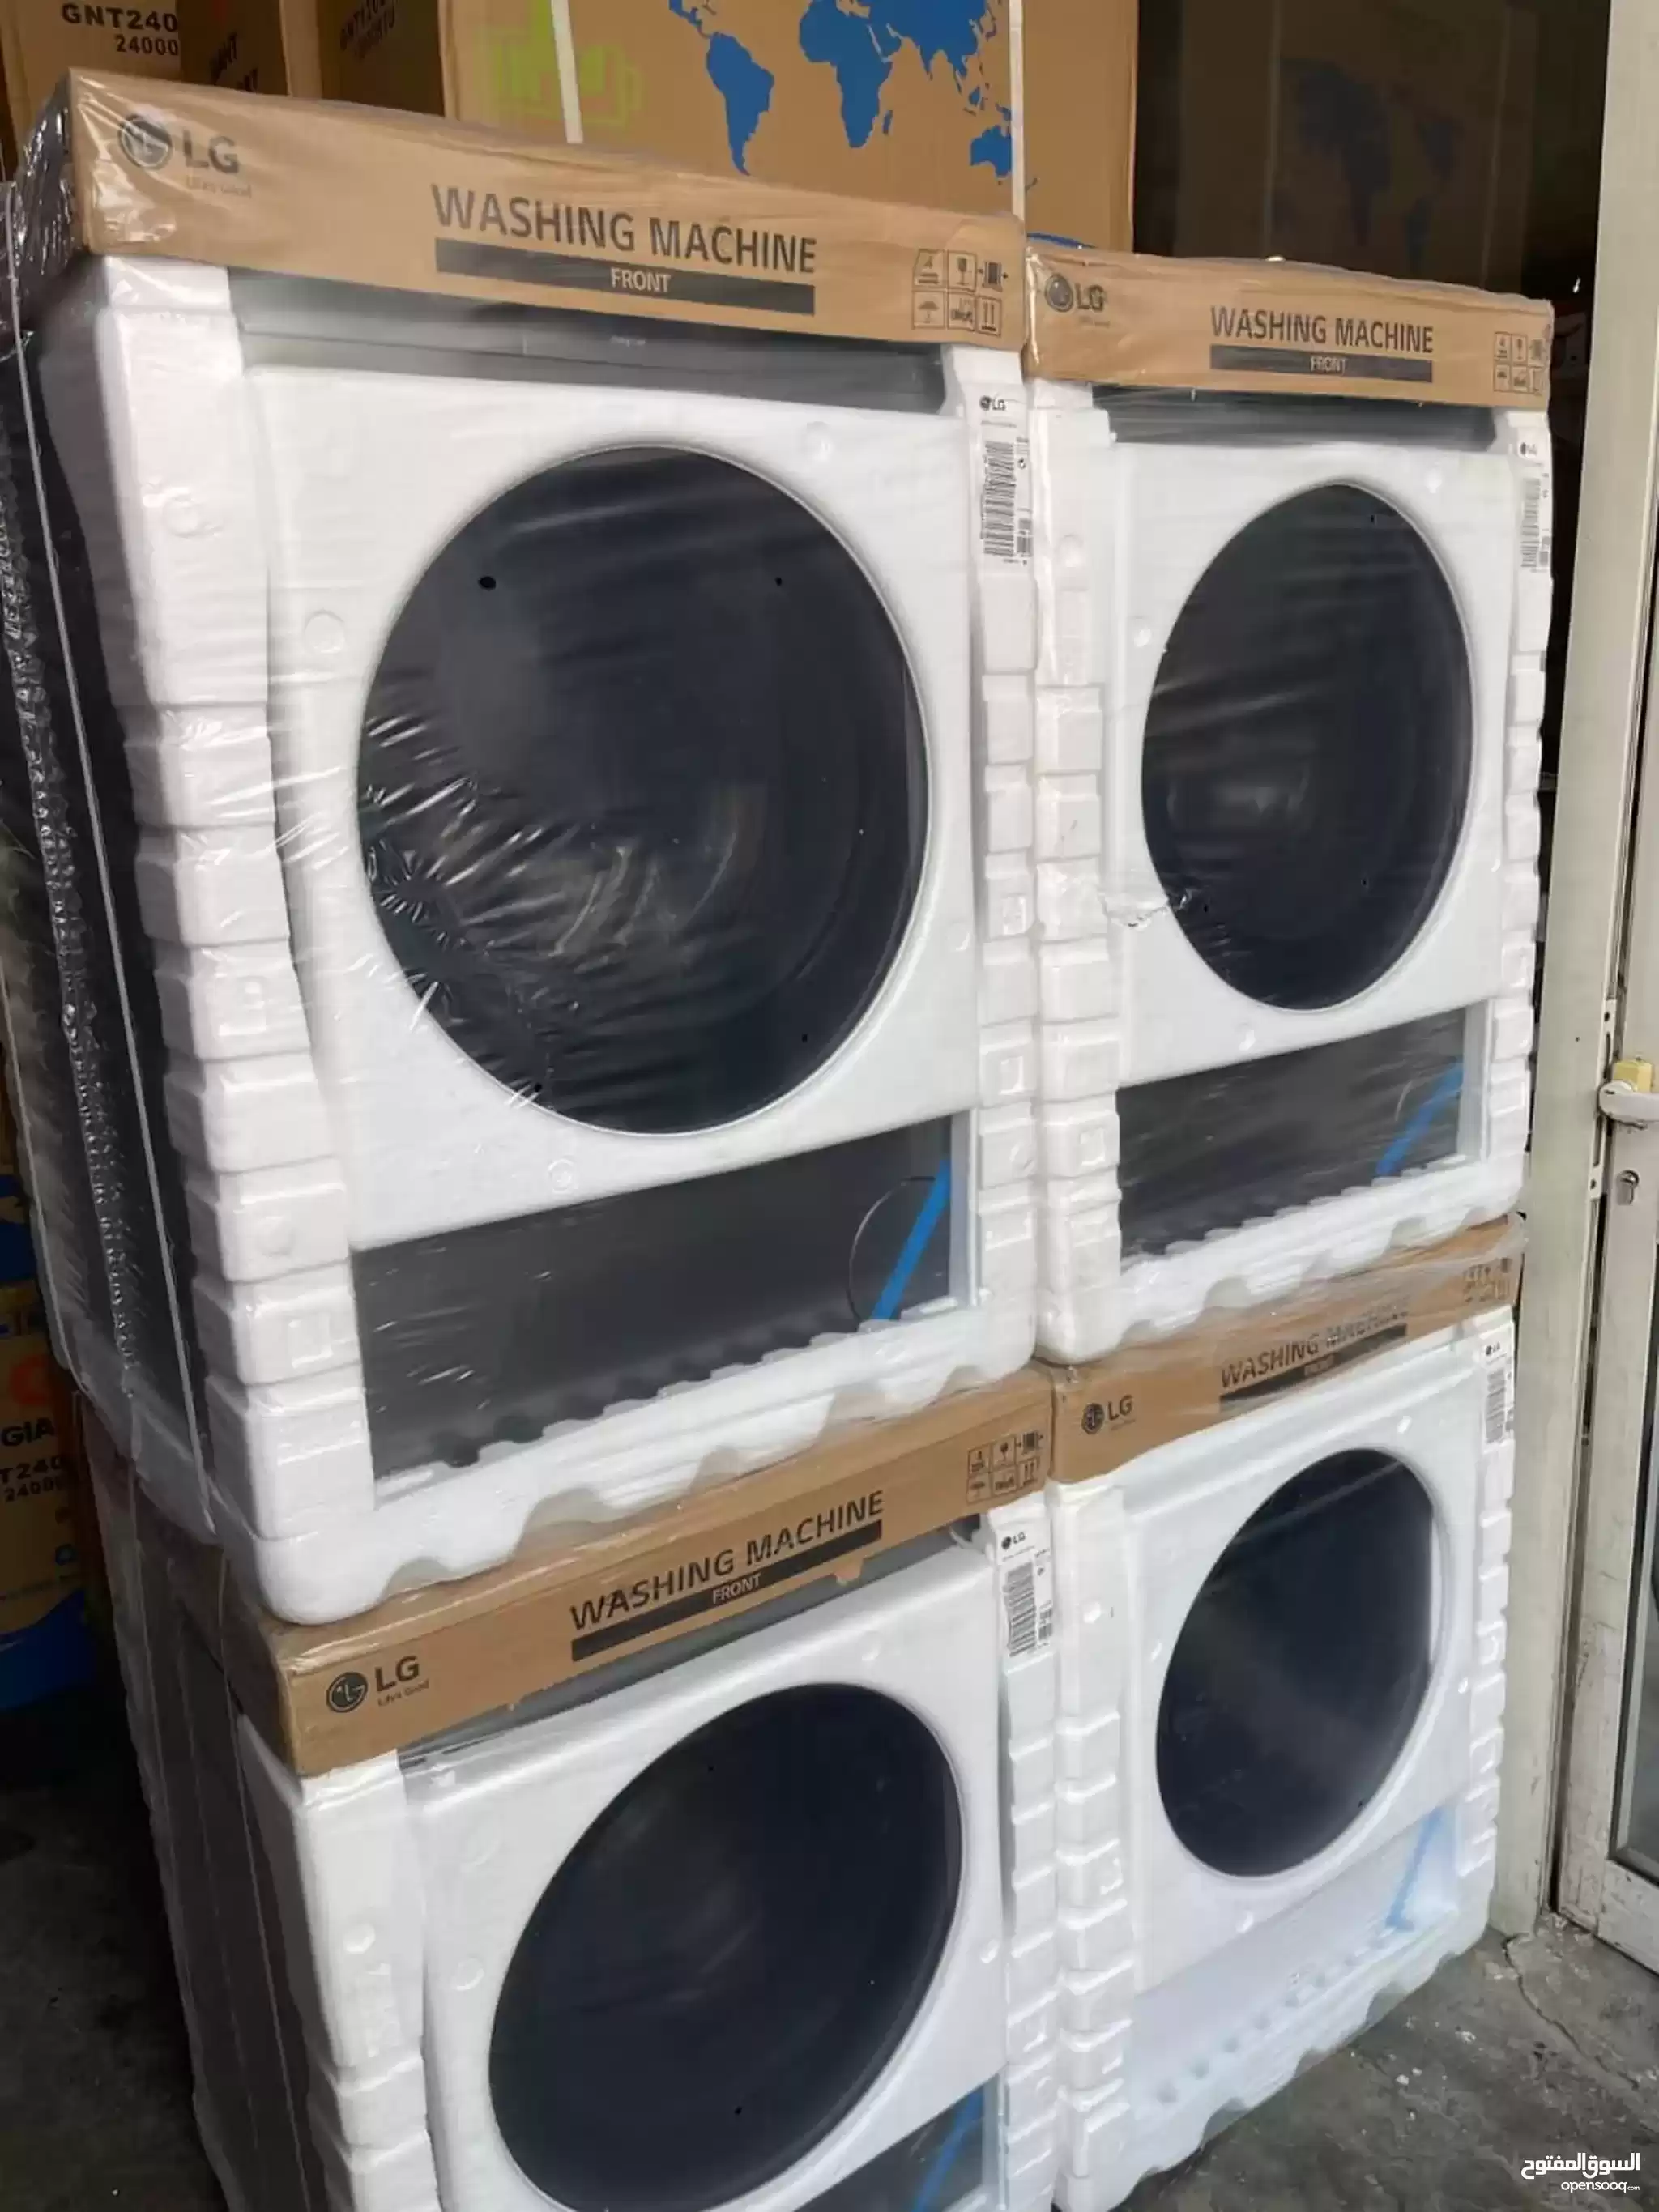 LG washing machines 08 kg،The price is 1650 per unit-pic_3